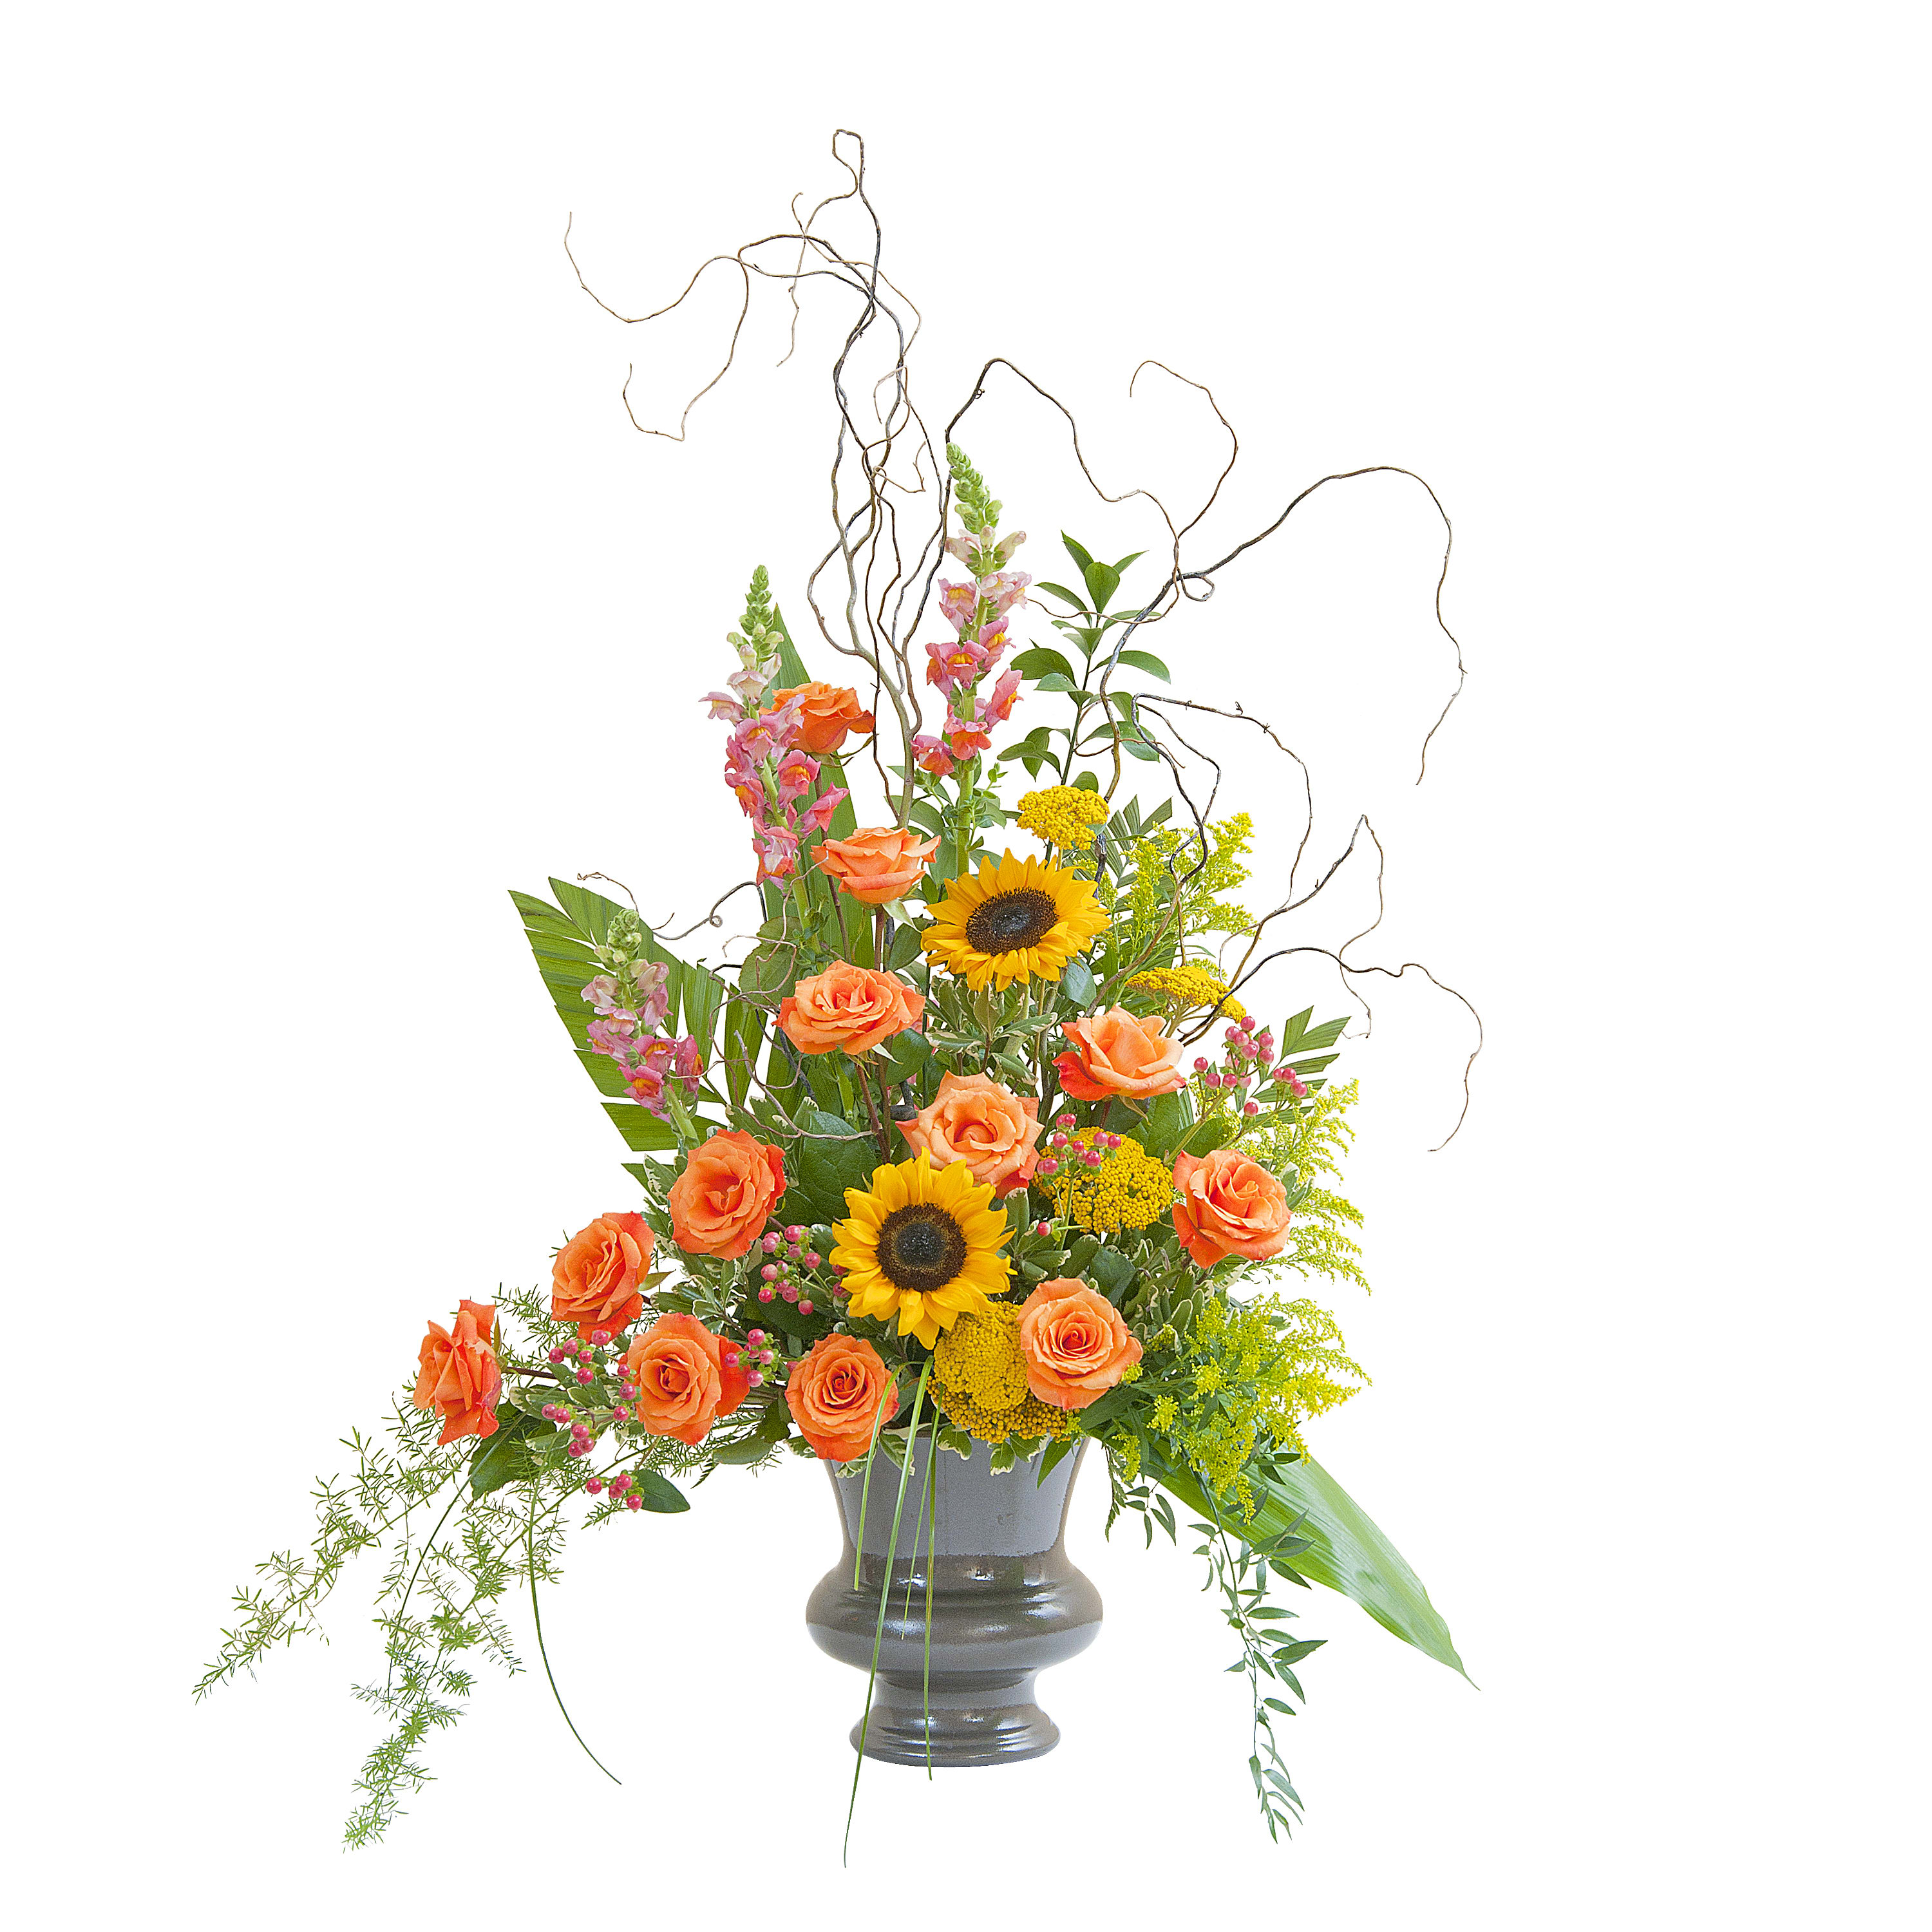 Heaven's Sunset Large Urn  - The colors of sunset are evident in this urn filled with Sunflowers, Roses, and accents of other premium flowers and foliage. Approximately 16&quot; wide by 34&quot; high